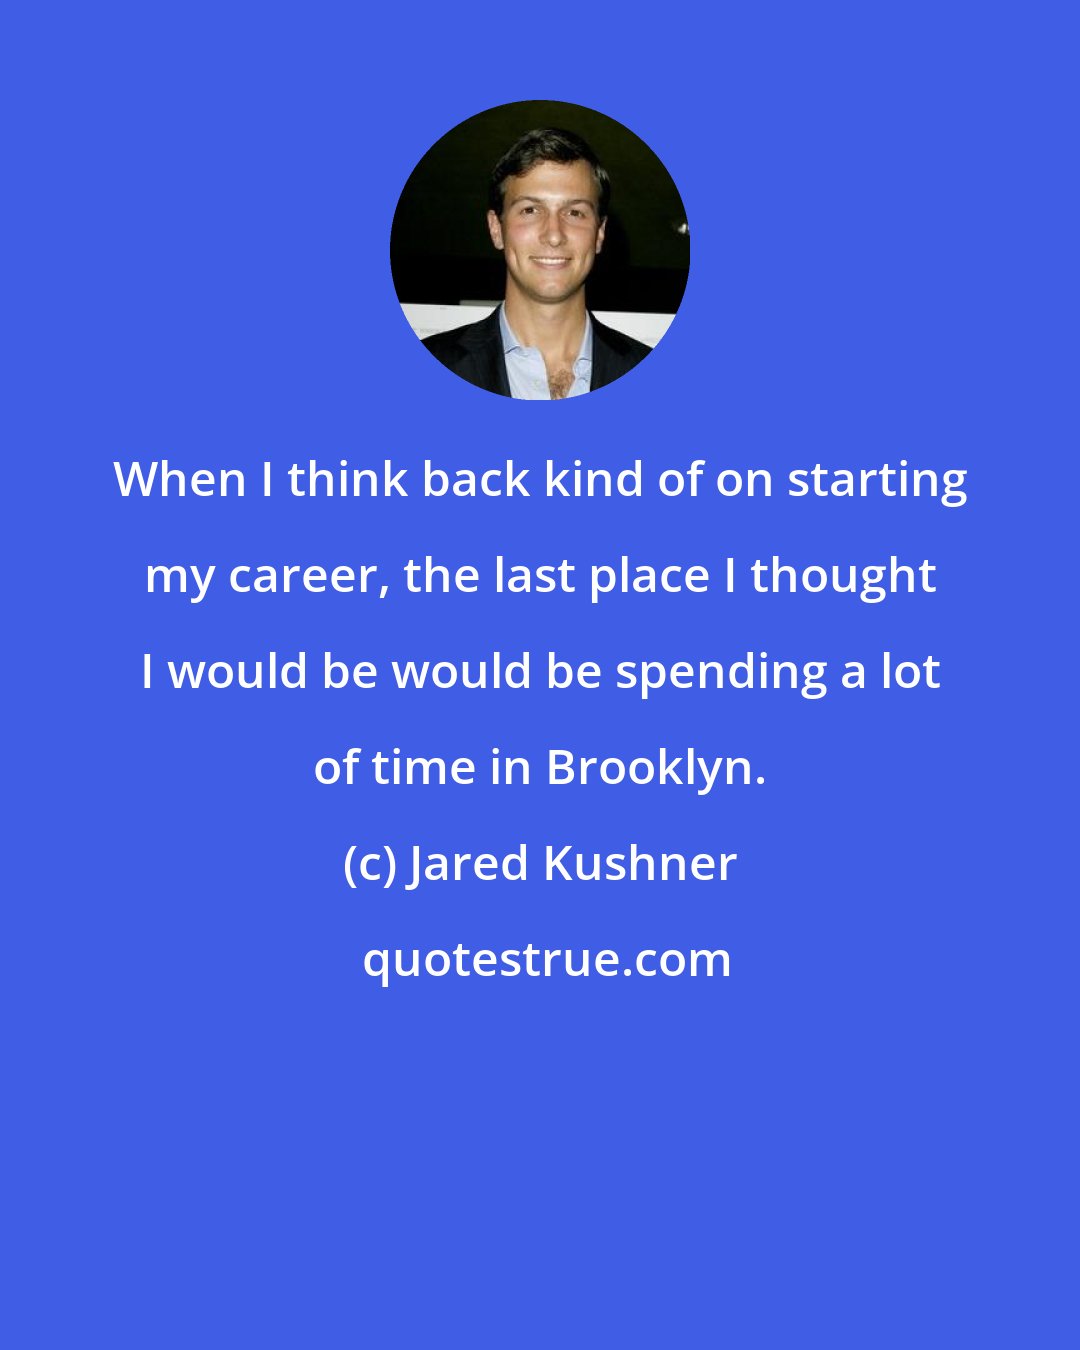 Jared Kushner: When I think back kind of on starting my career, the last place I thought I would be would be spending a lot of time in Brooklyn.